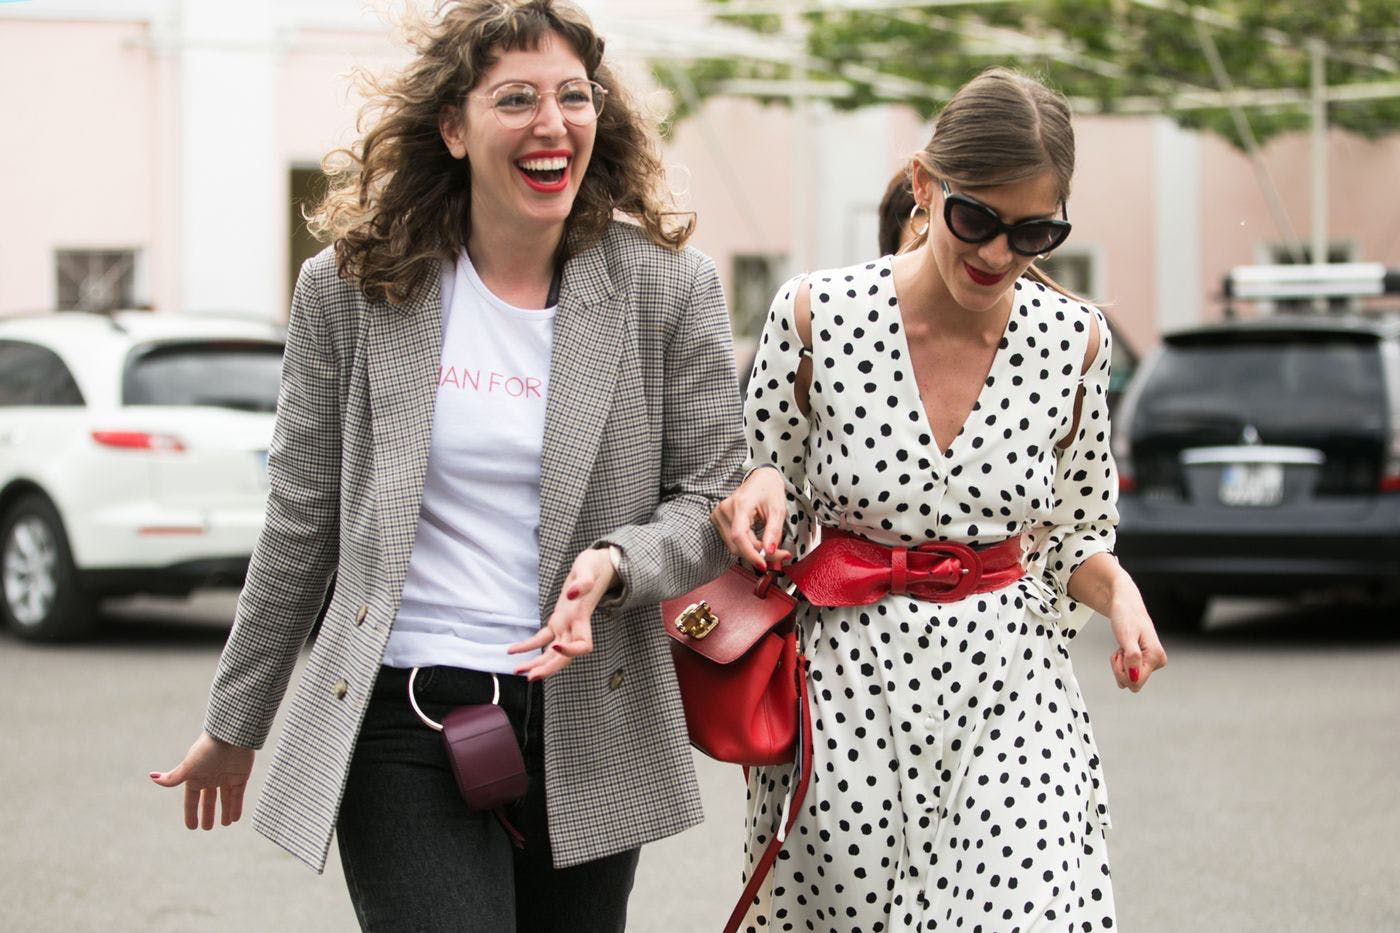 TBILISI FASHION WEEK MIGHT BE THE COOLEST STREET STYLE WE HAVE EVER SEEN